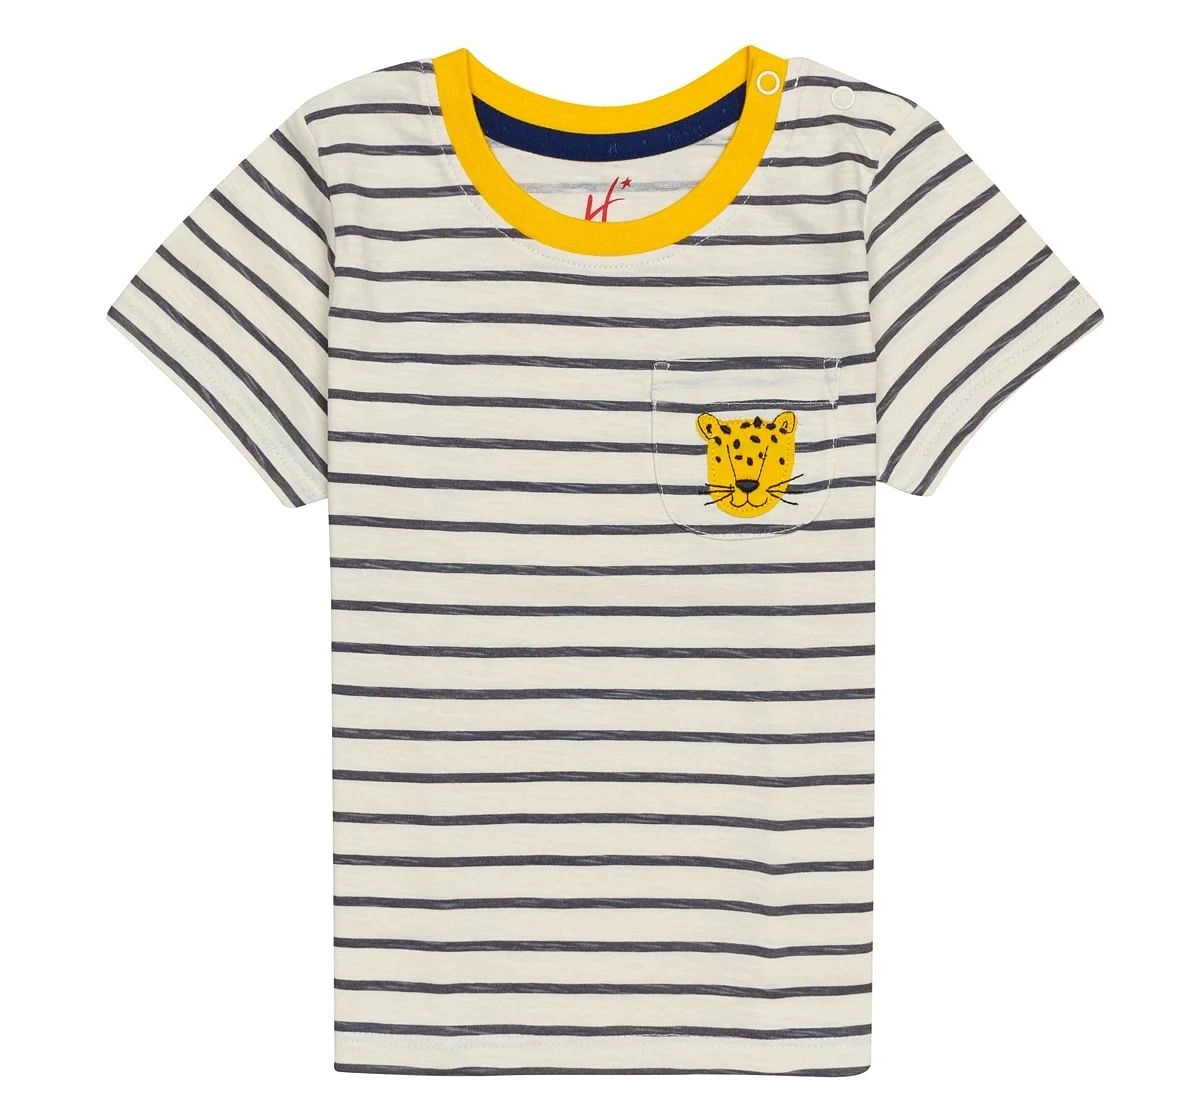 H by Hamleys Boys Short Sleeves T-Shirt Tiger Patchwork Striped-Charcoal Multi